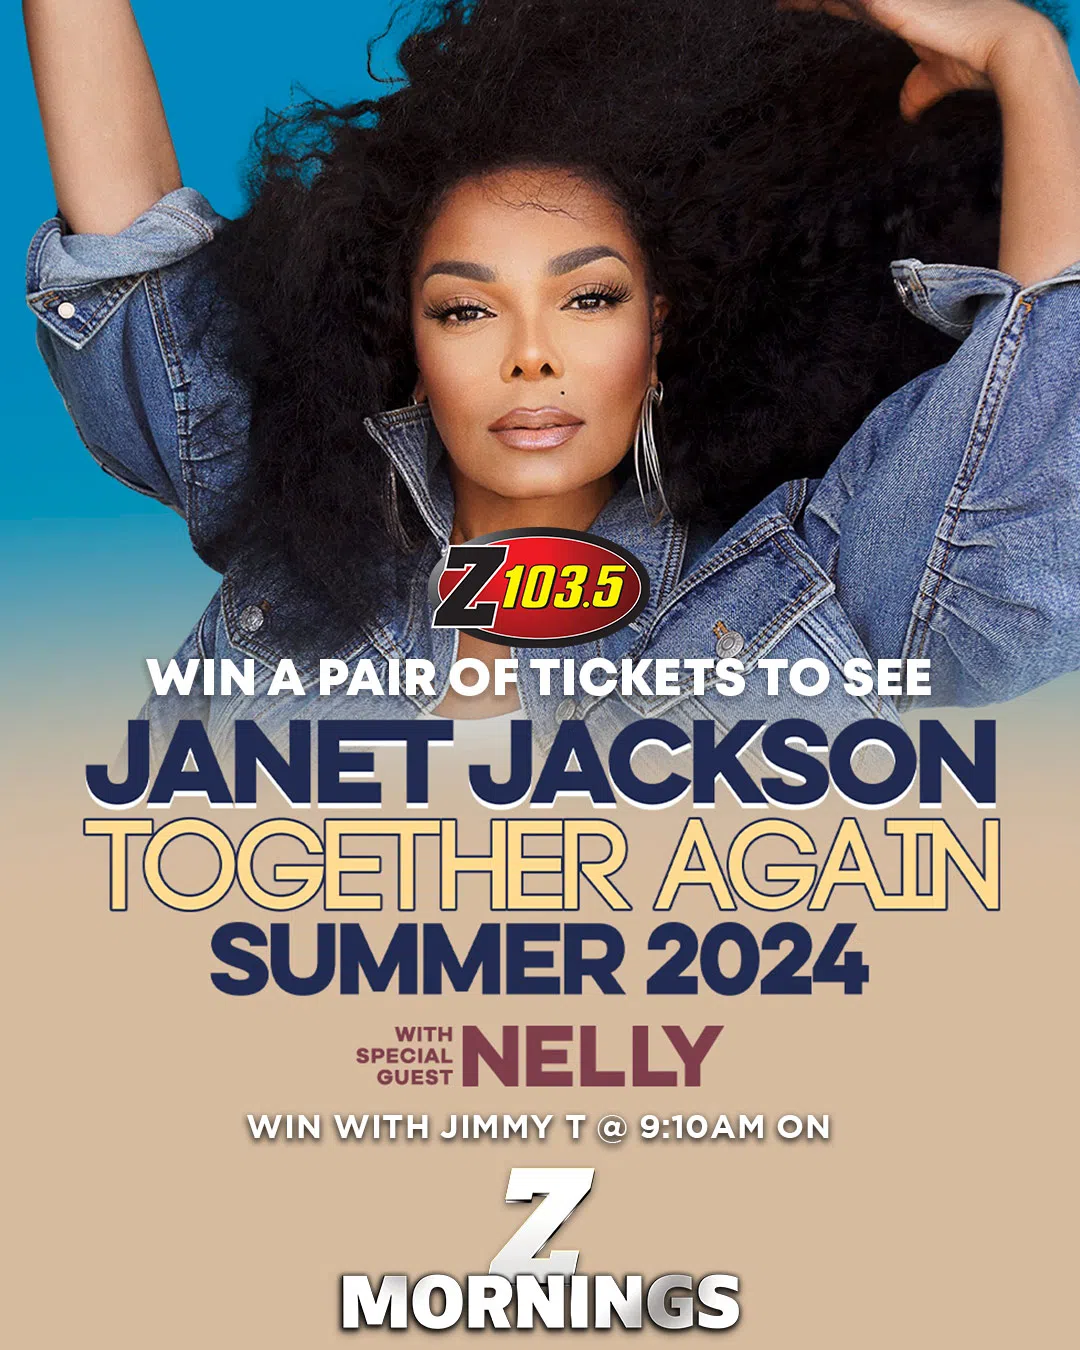 Feature: https://z1035.com/win/win-tickets-to-see-janet-jackson-and-nelly/